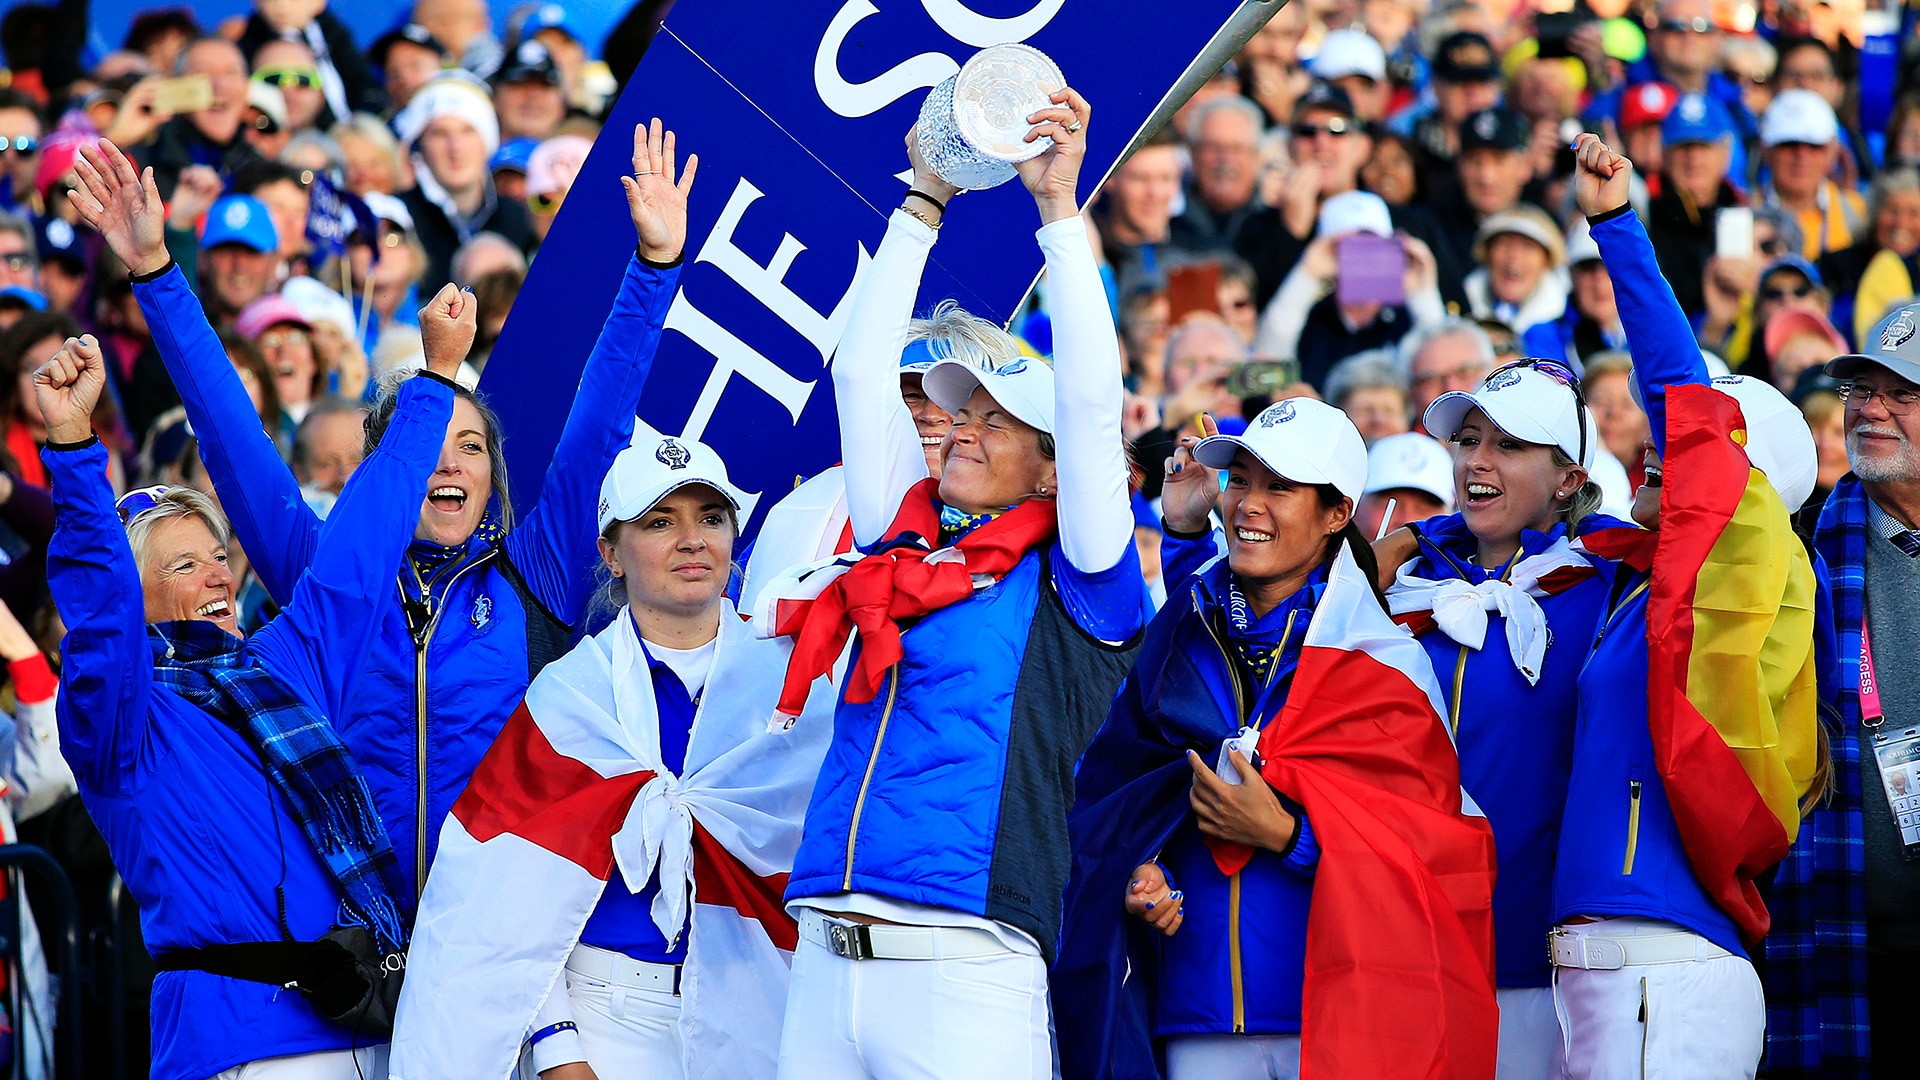 This week in golf: TV schedule, tee times, info for Solheim Cup, KFT Championship